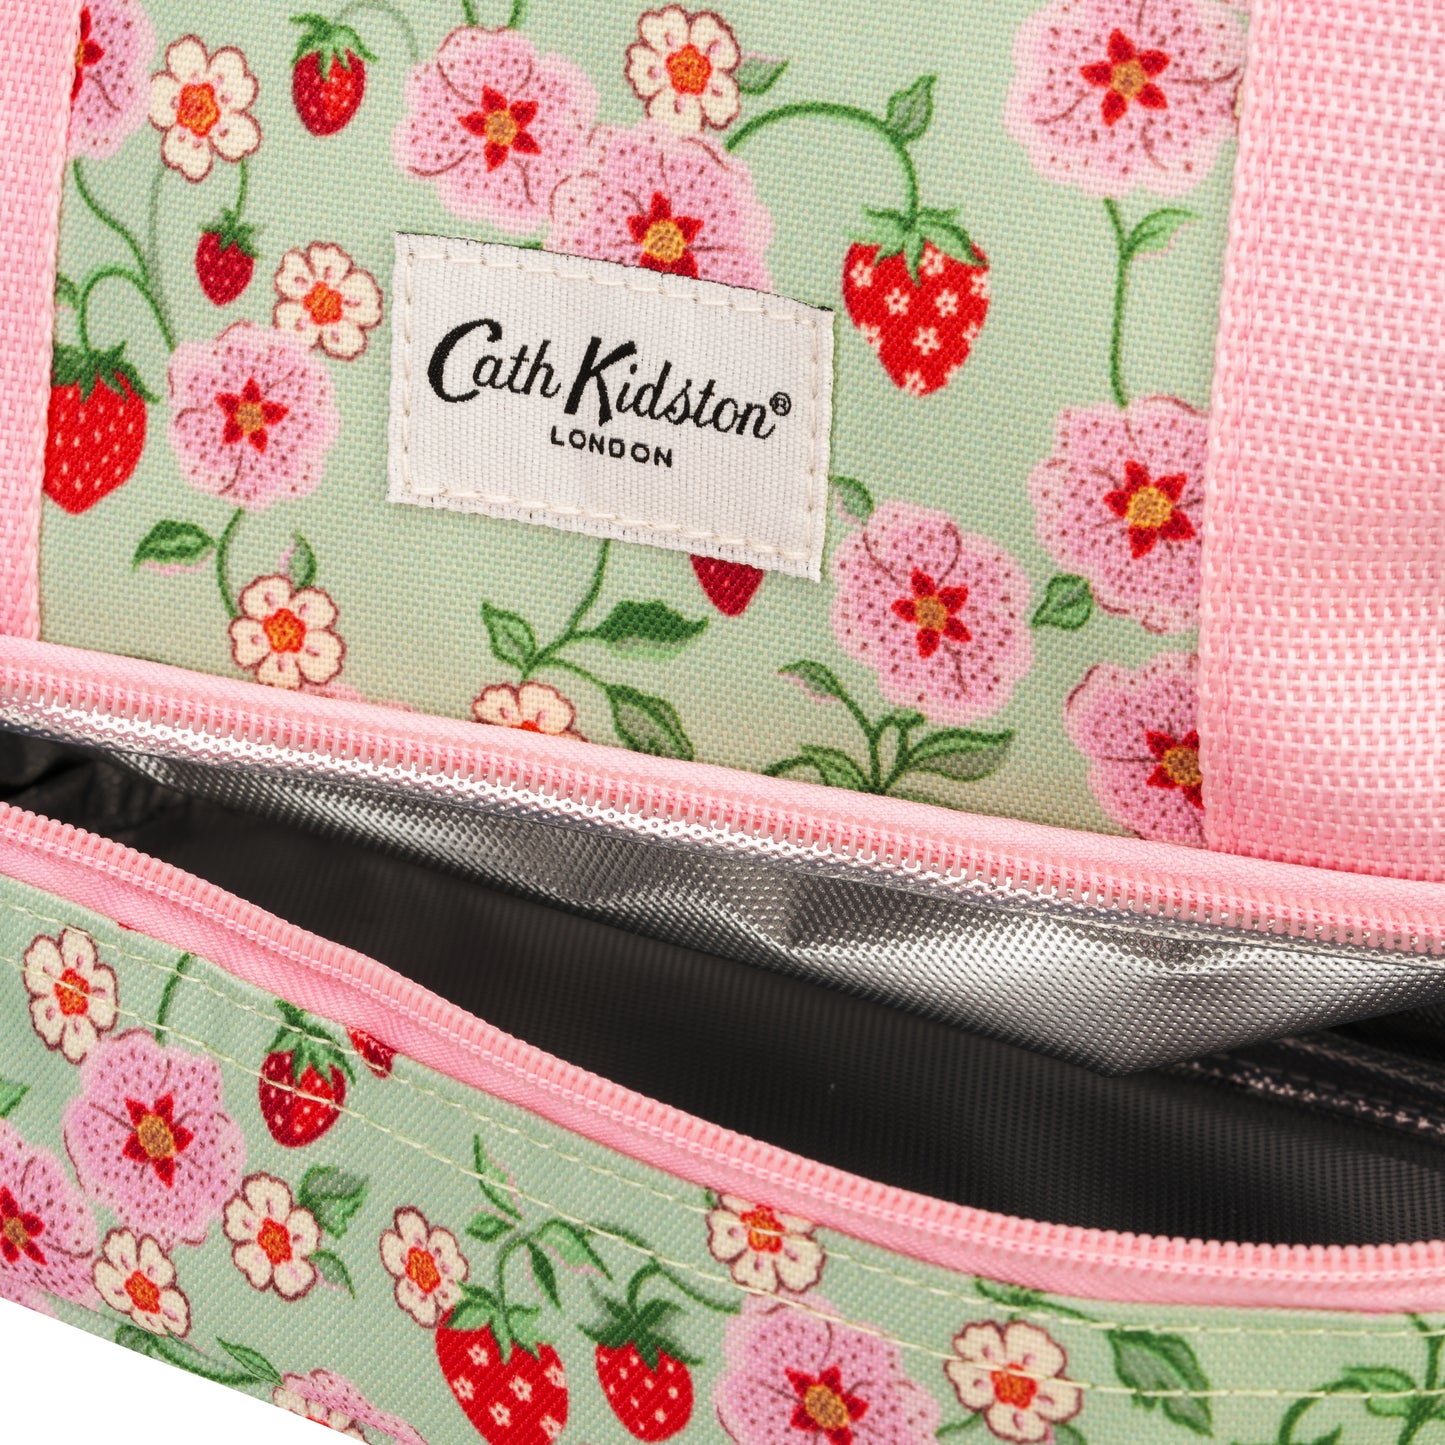 Cath Kidson Strawberry Small Lunch Tote Bag